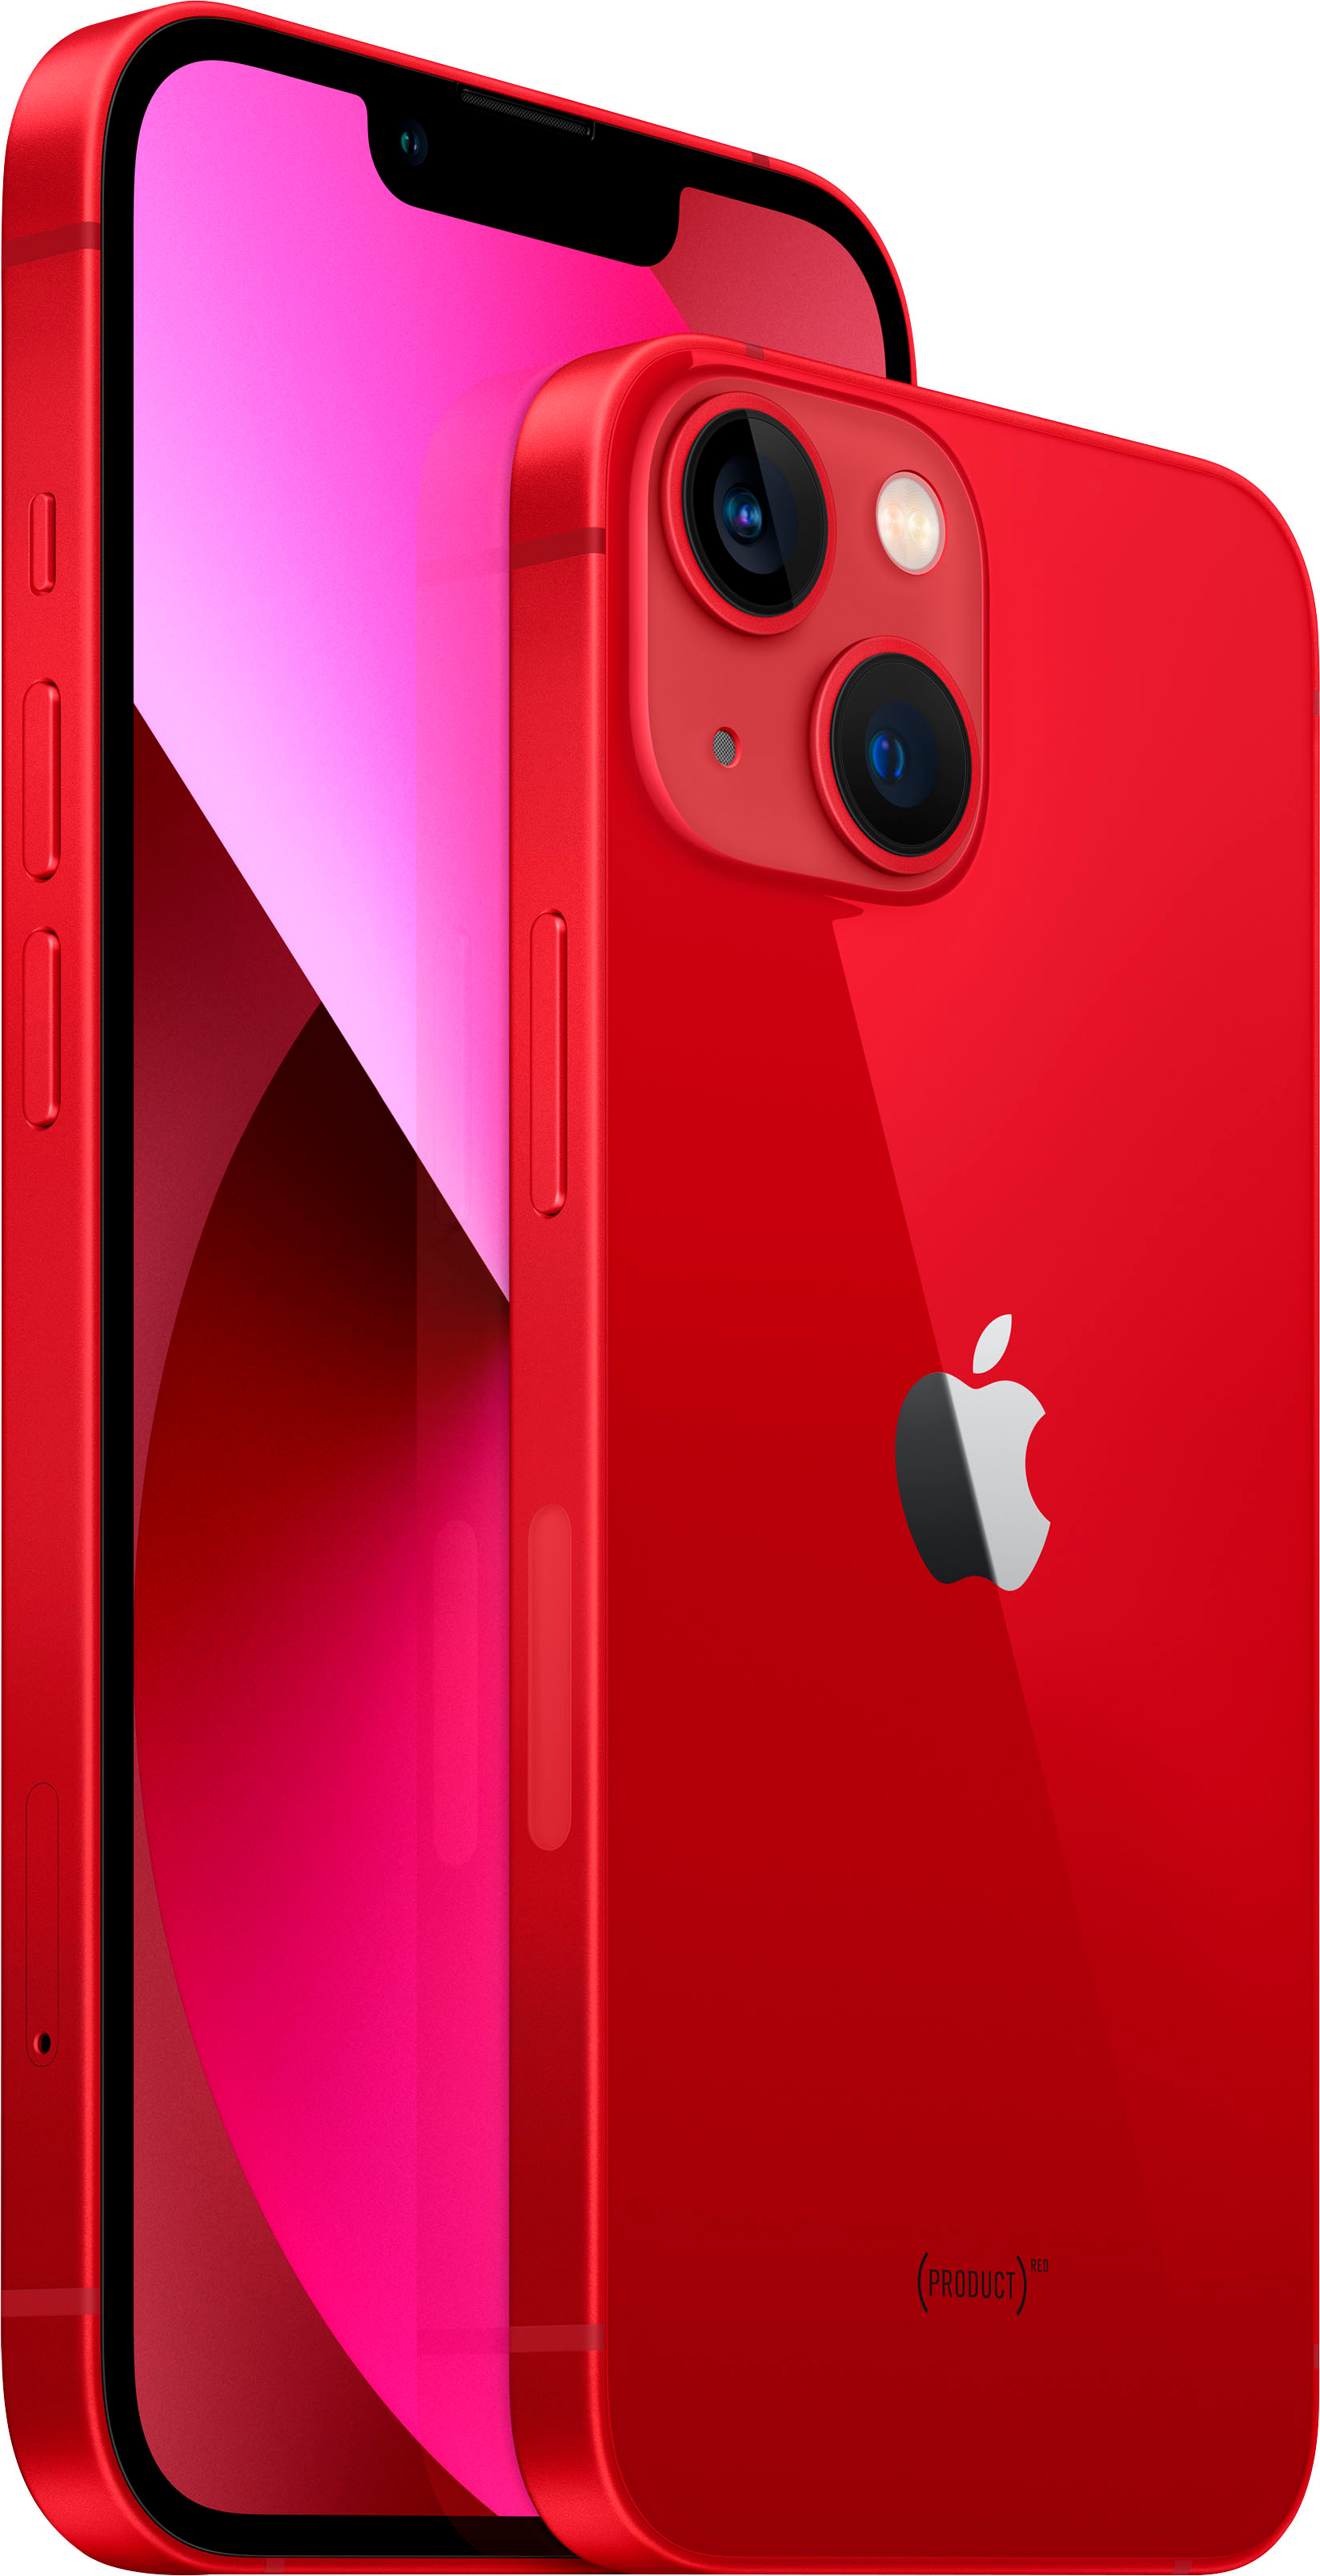 5G iPhone 128GB Apple 13 Best MMM93LL/A Buy (PRODUCT)RED (Unlocked) -